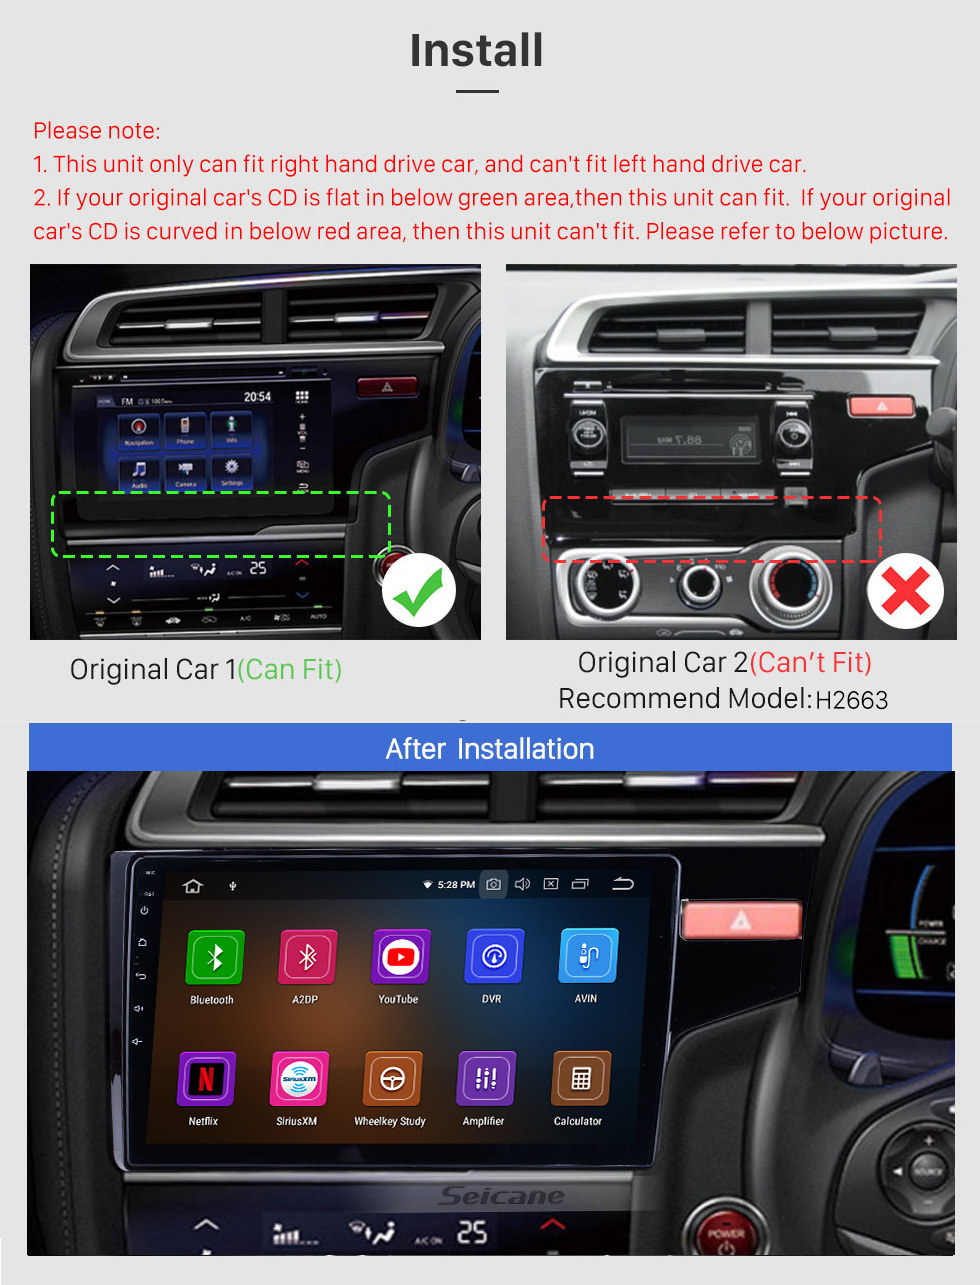 Seicane 9 Inch Android 11.0 GPS Navigation System Radio For 2014-2016 Honda Fit Support DVD Player Remote Control Bluetooth Touch Screen TV tuner